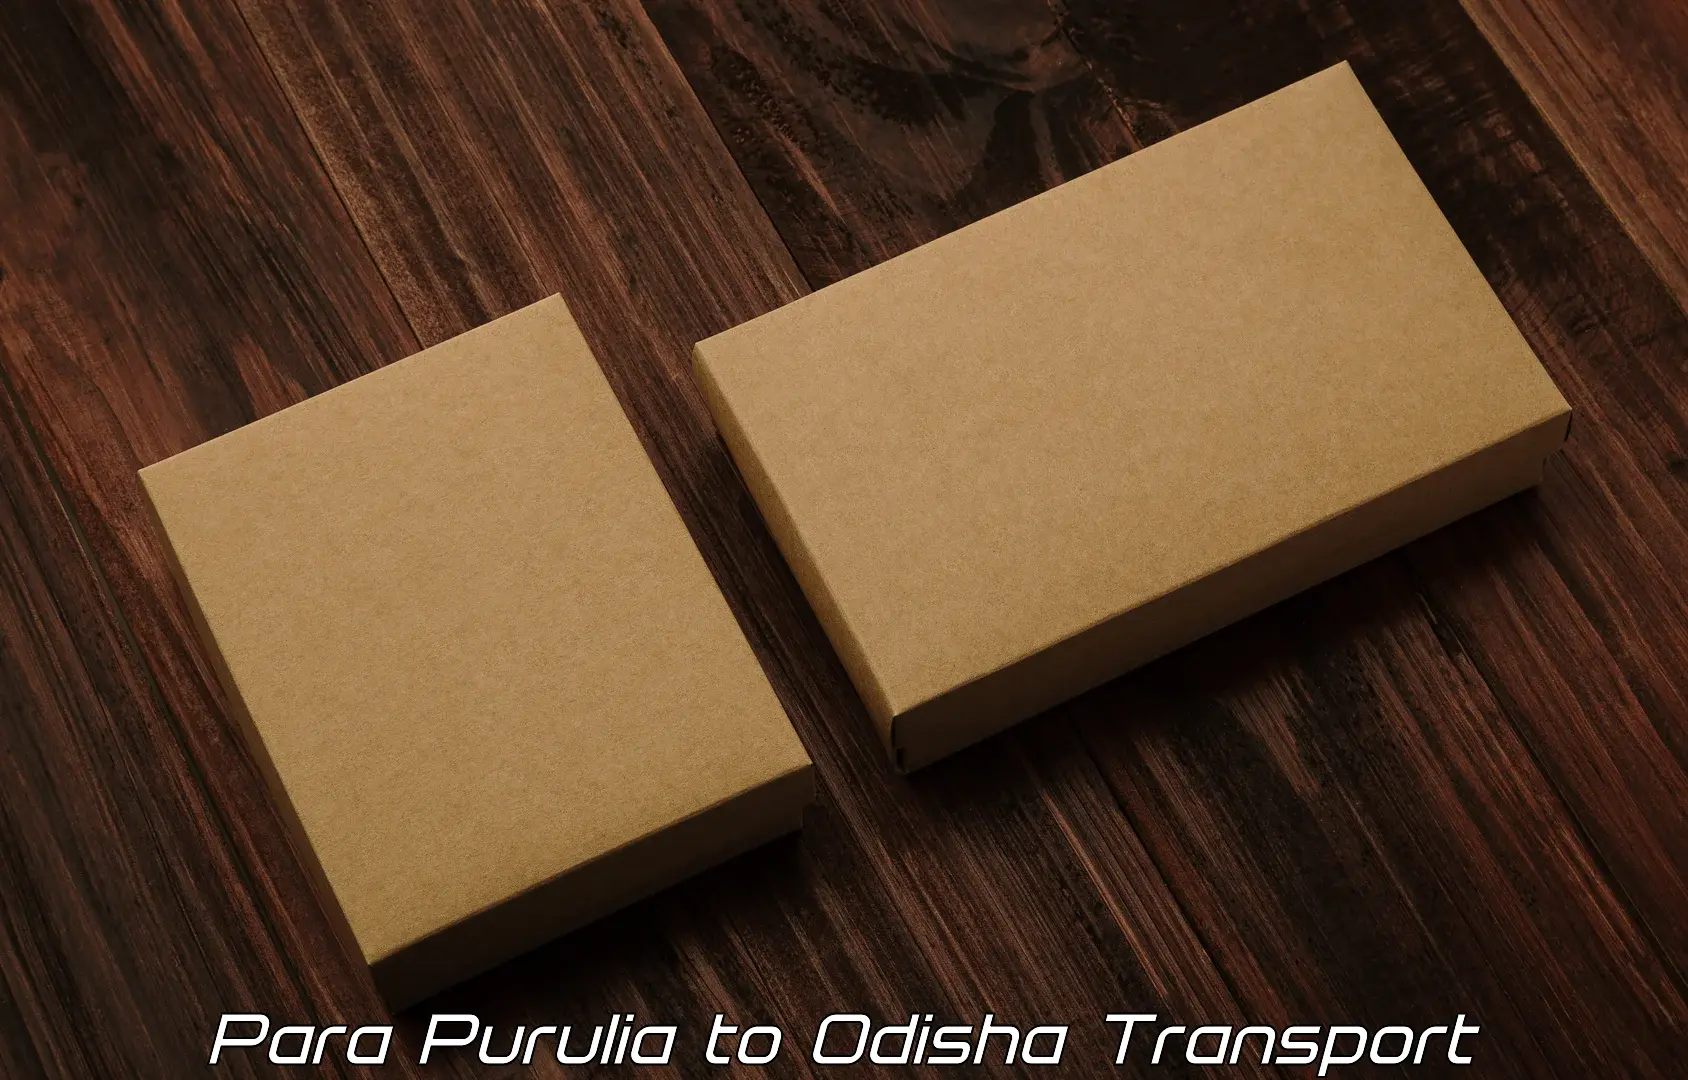 Package delivery services Para Purulia to Pottangi